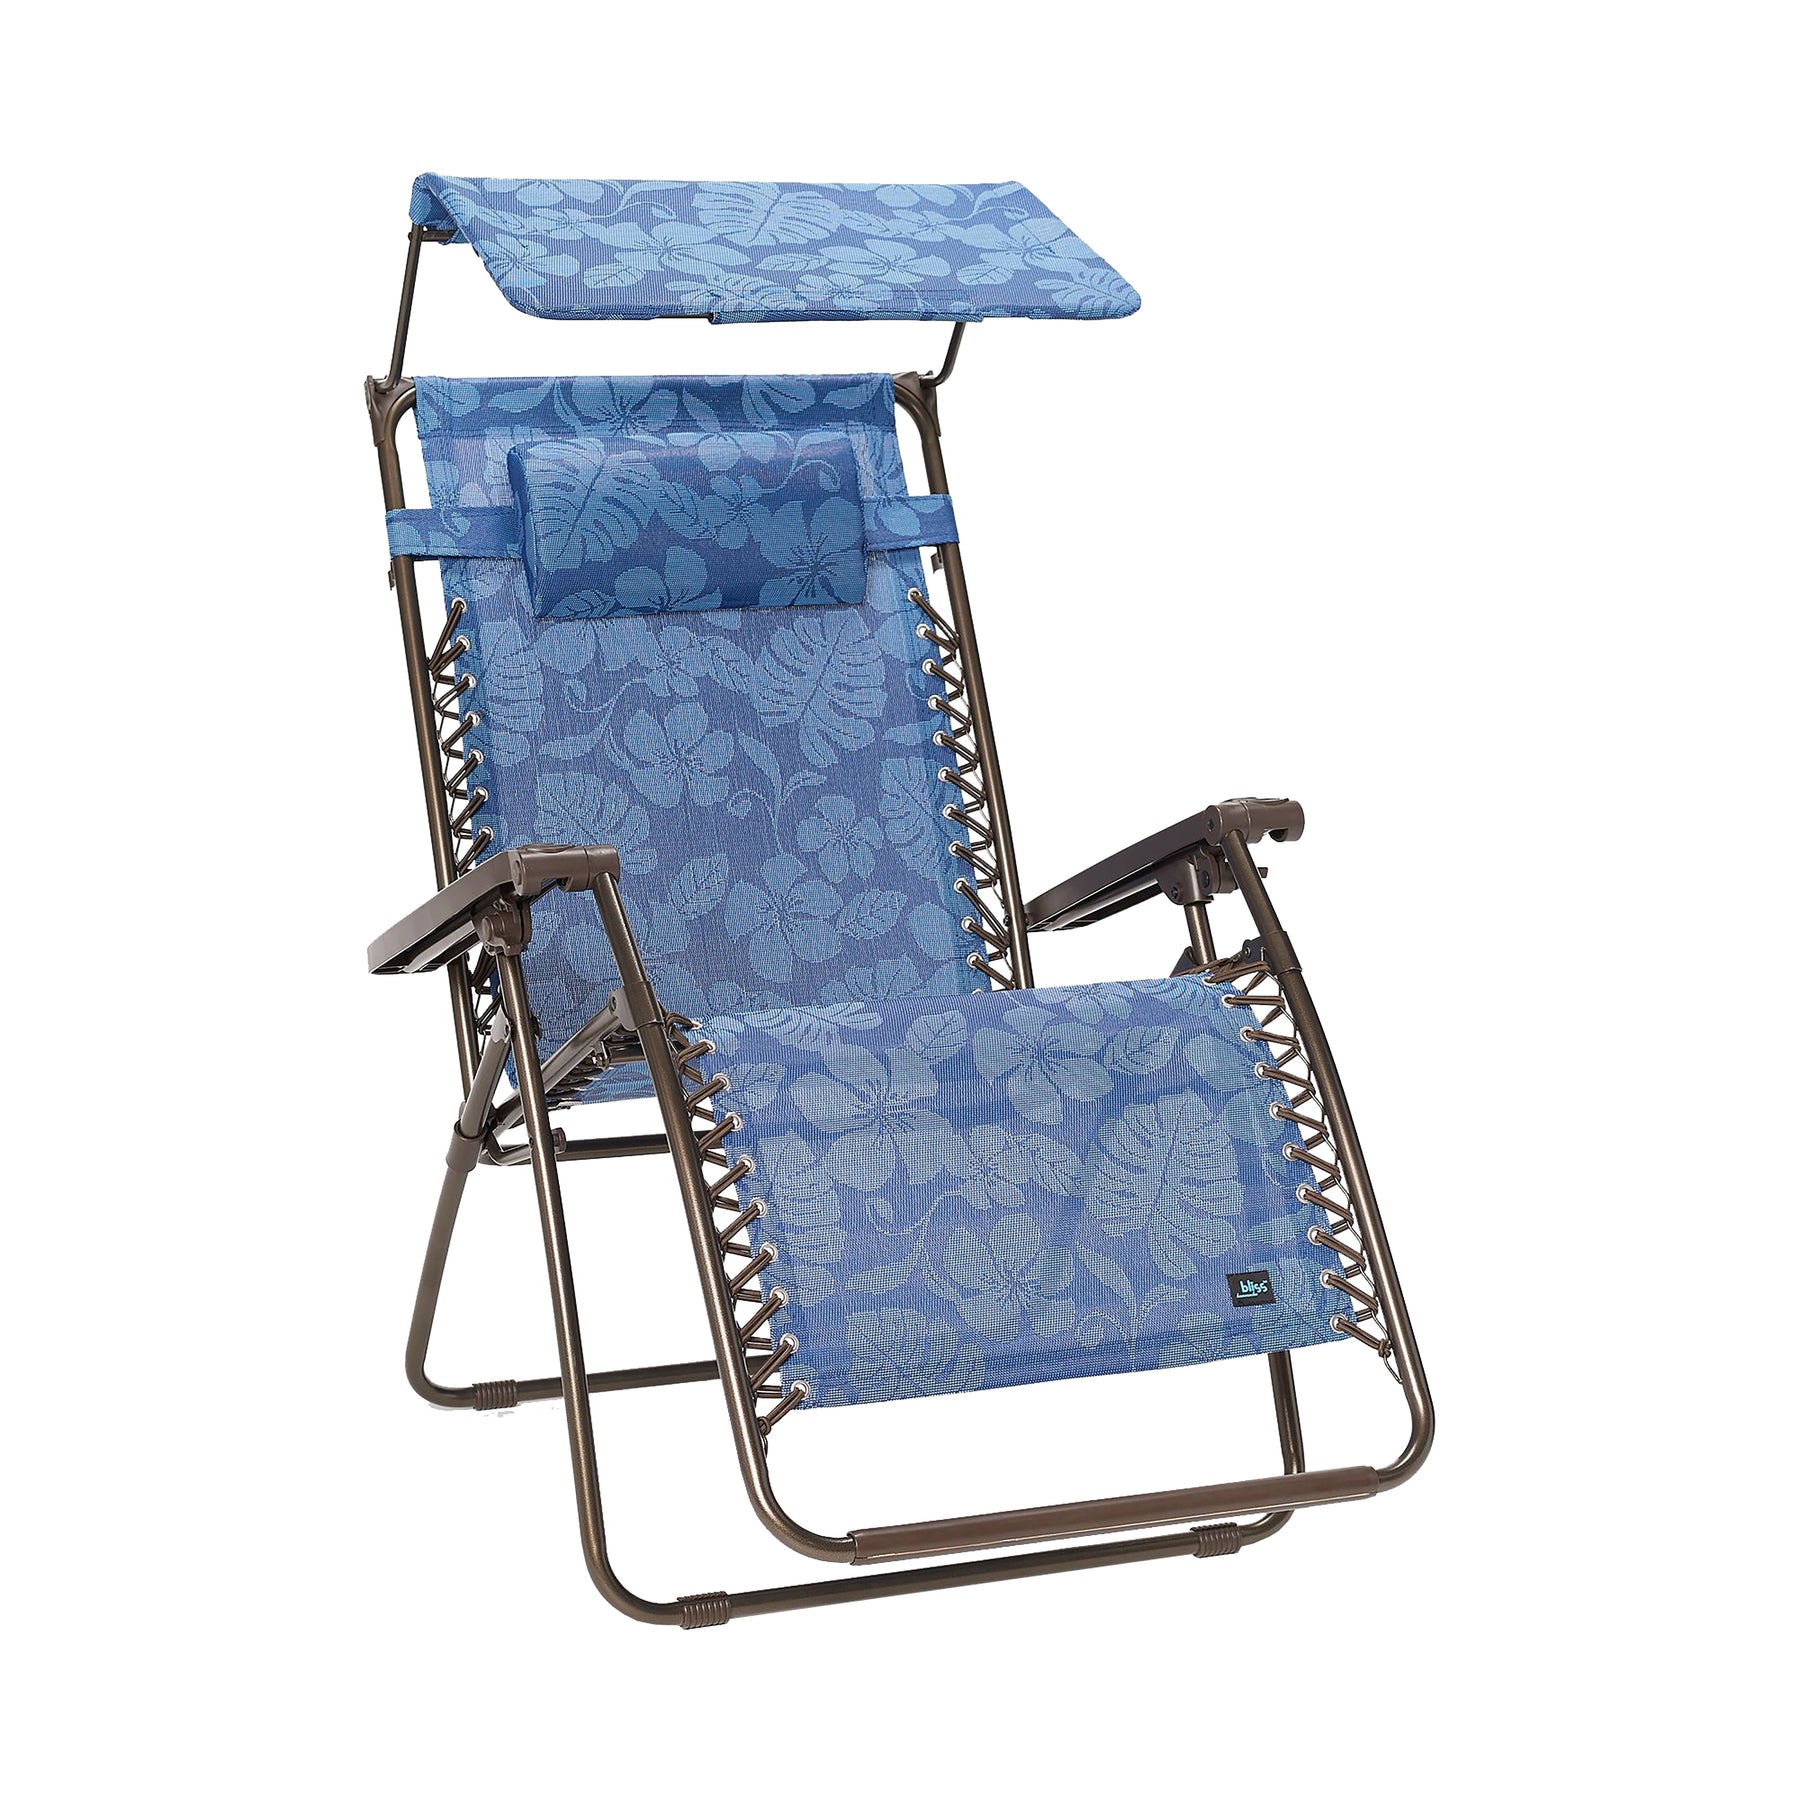 Bliss Hammocks 30-inch Wide XL Zero Gravity Chair with Canopy in the blue flowers variation.